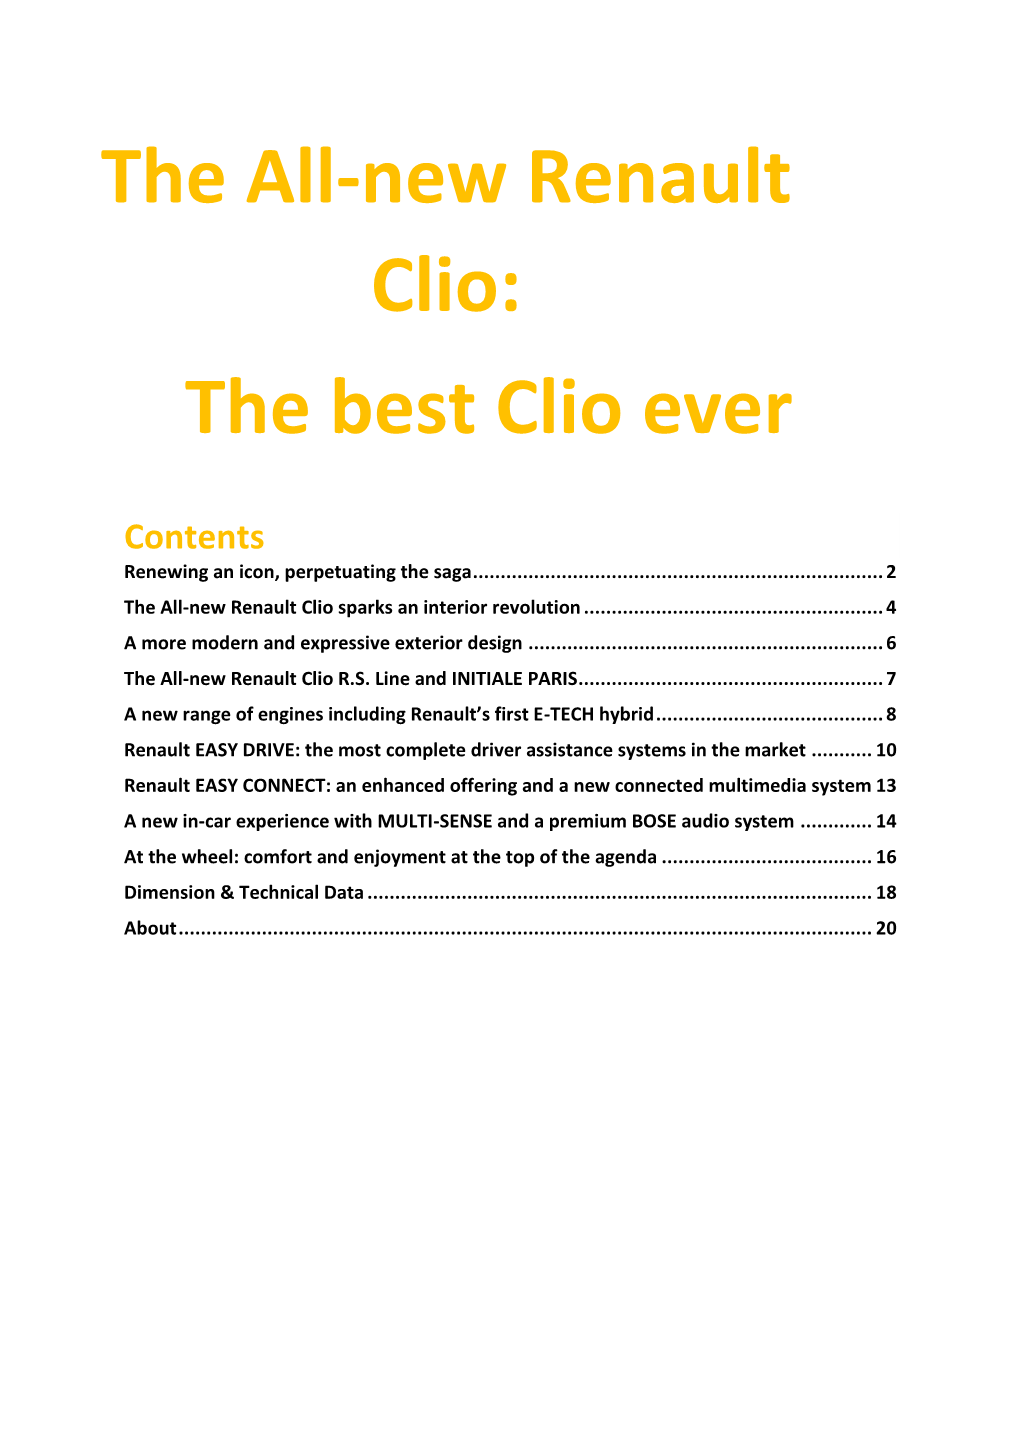 The All-New Renault Clio: the Best Clio Ever